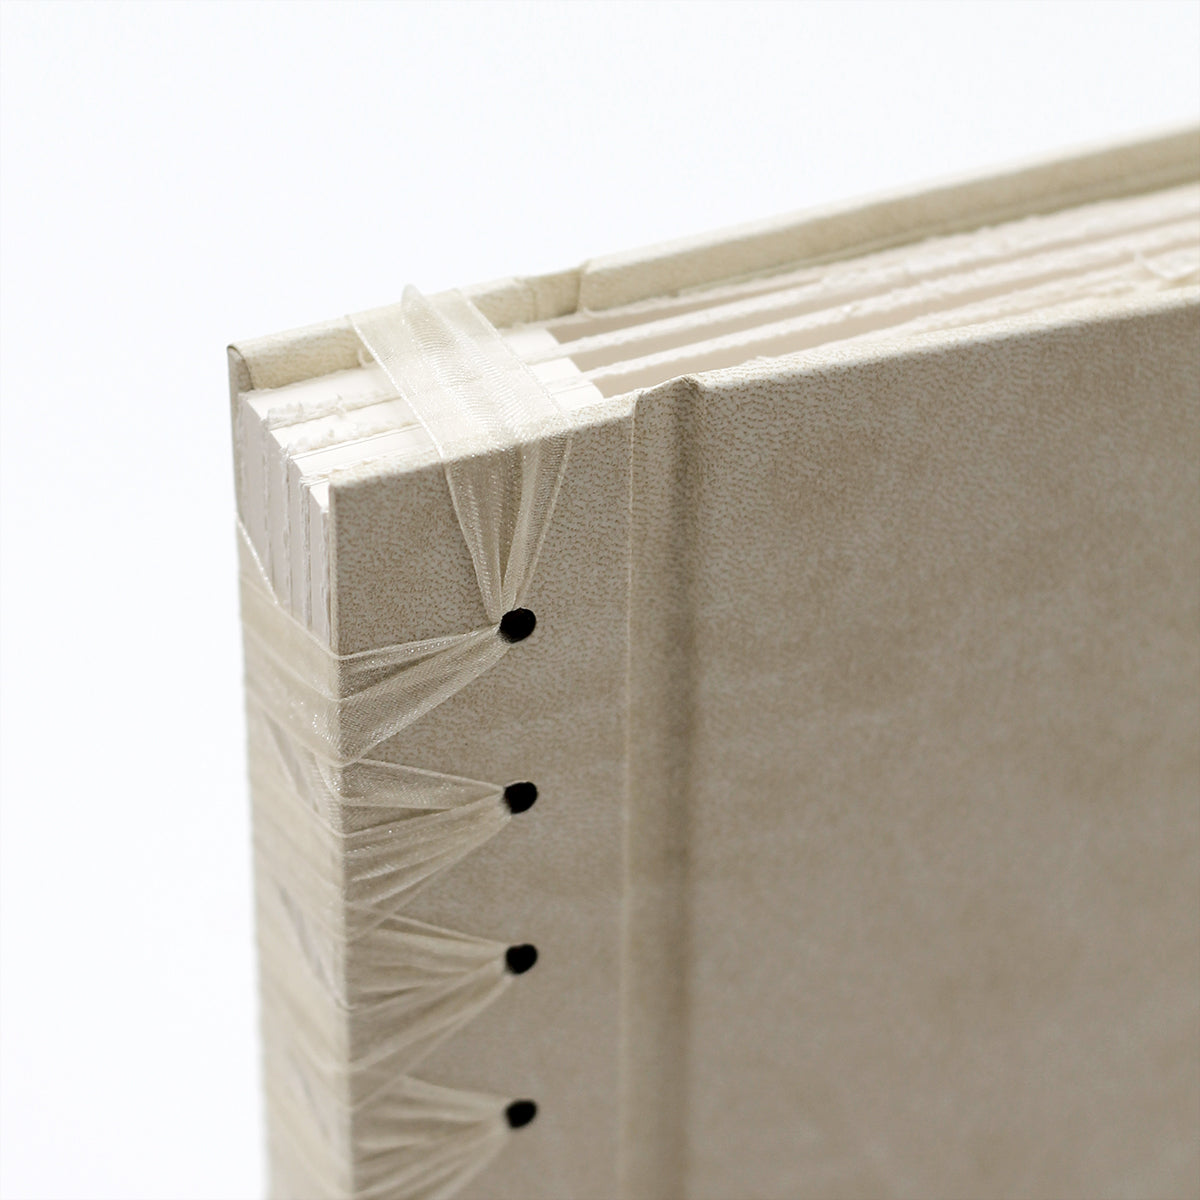 Small Paper Page Album with Cream ~ Animal Friendly Faux Leather